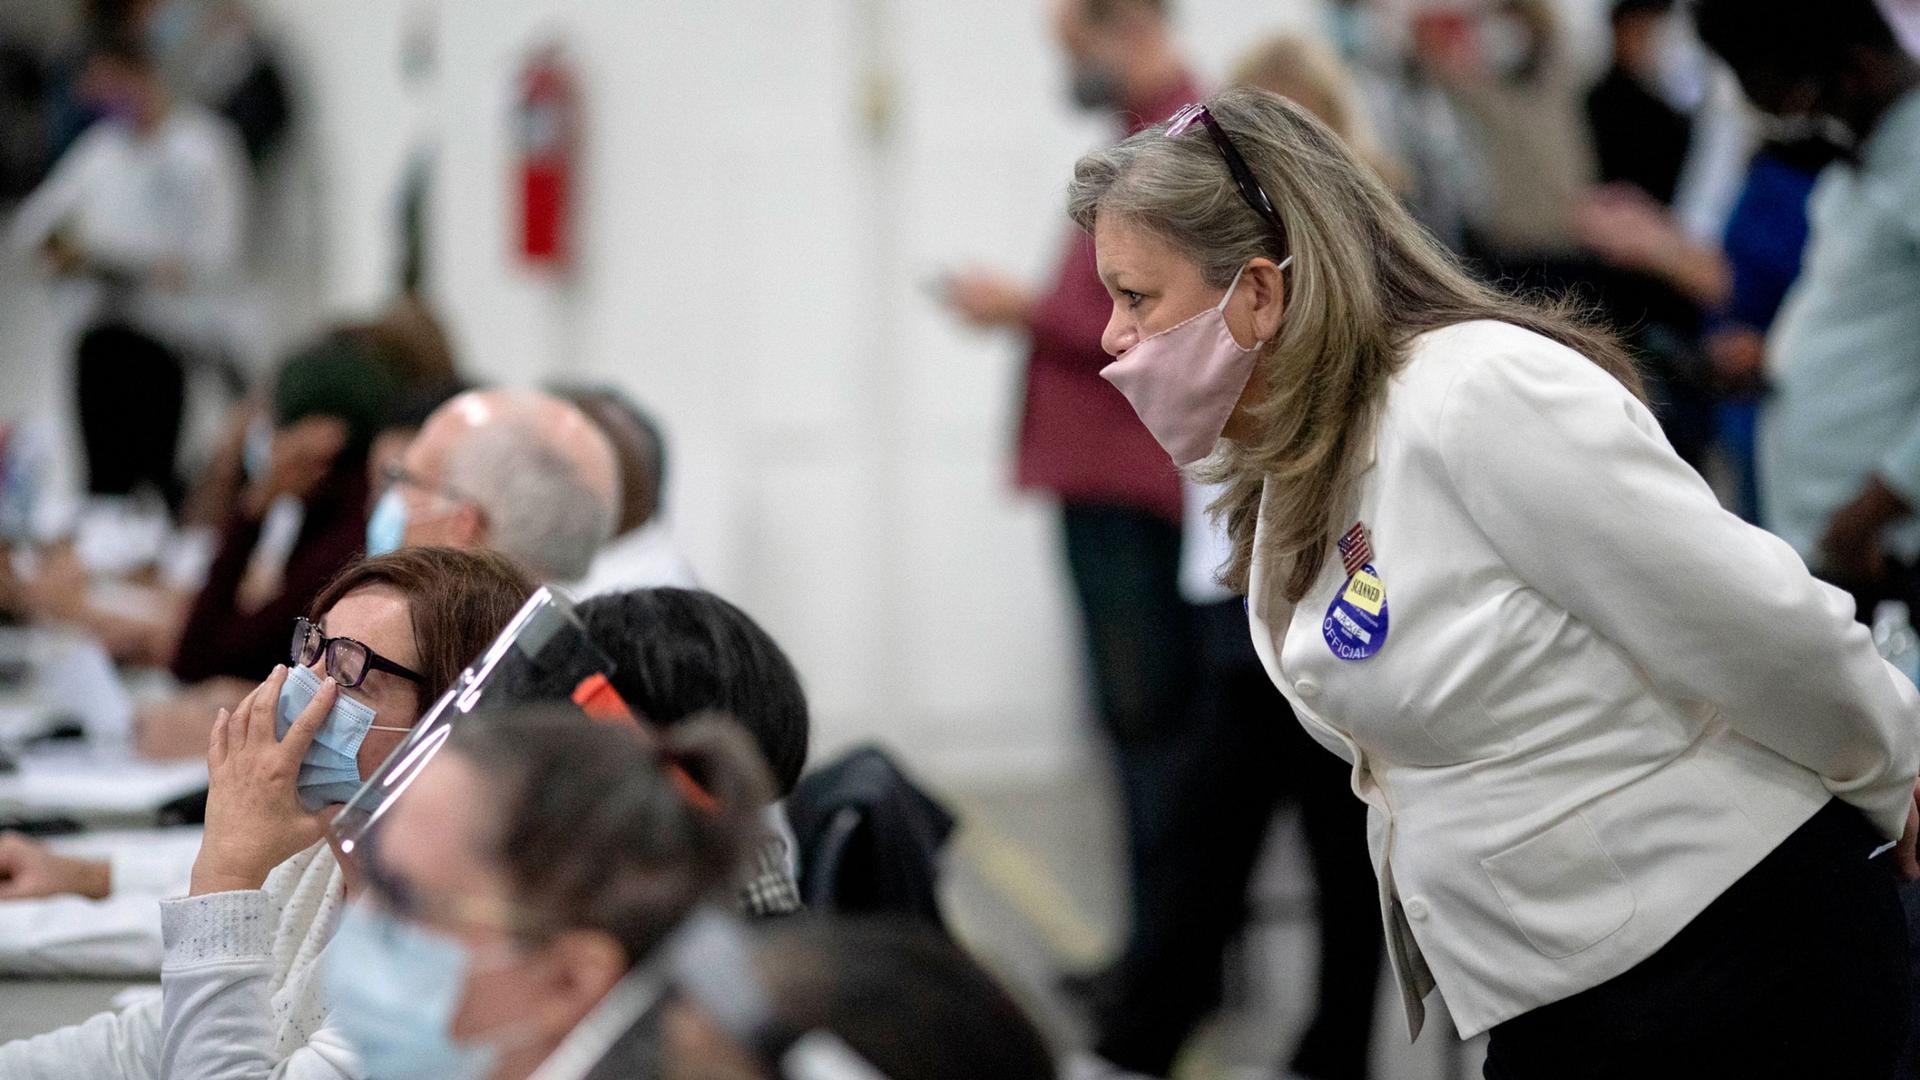 A woman wearing a white blazer and face mask is shown looking over the shoulder of a row of seated election inspectors.